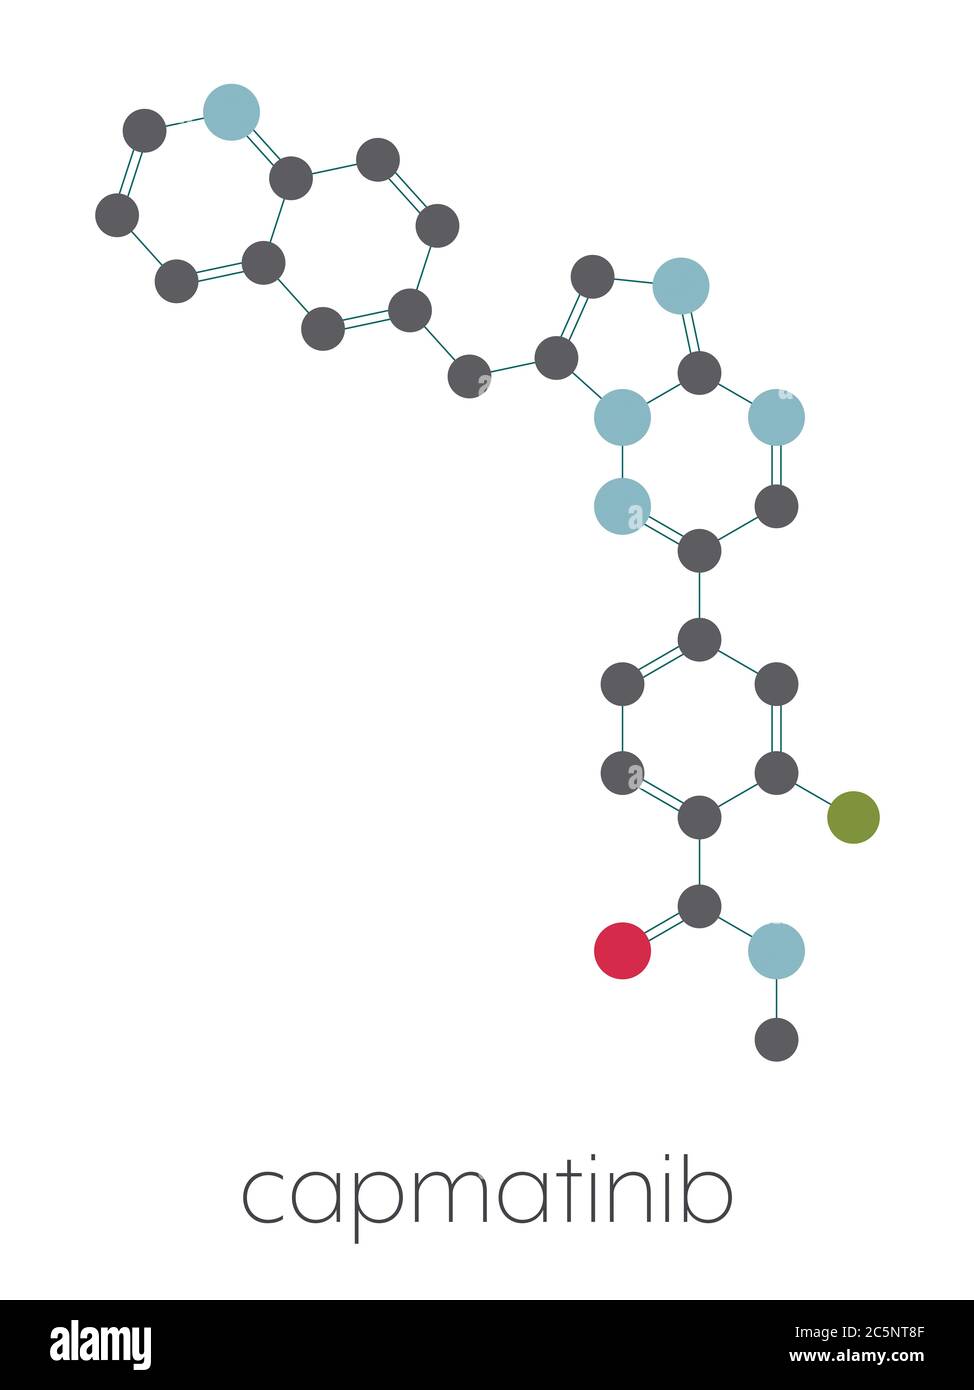 Capmatinib cancer drug molecule (c-met inhibitor). Stylized skeletal formula (chemical structure): Atoms are shown as color-coded circles: hydrogen (hidden), carbon (grey), nitrogen (blue), oxygen (red), fluorine (cyan). Stock Photo